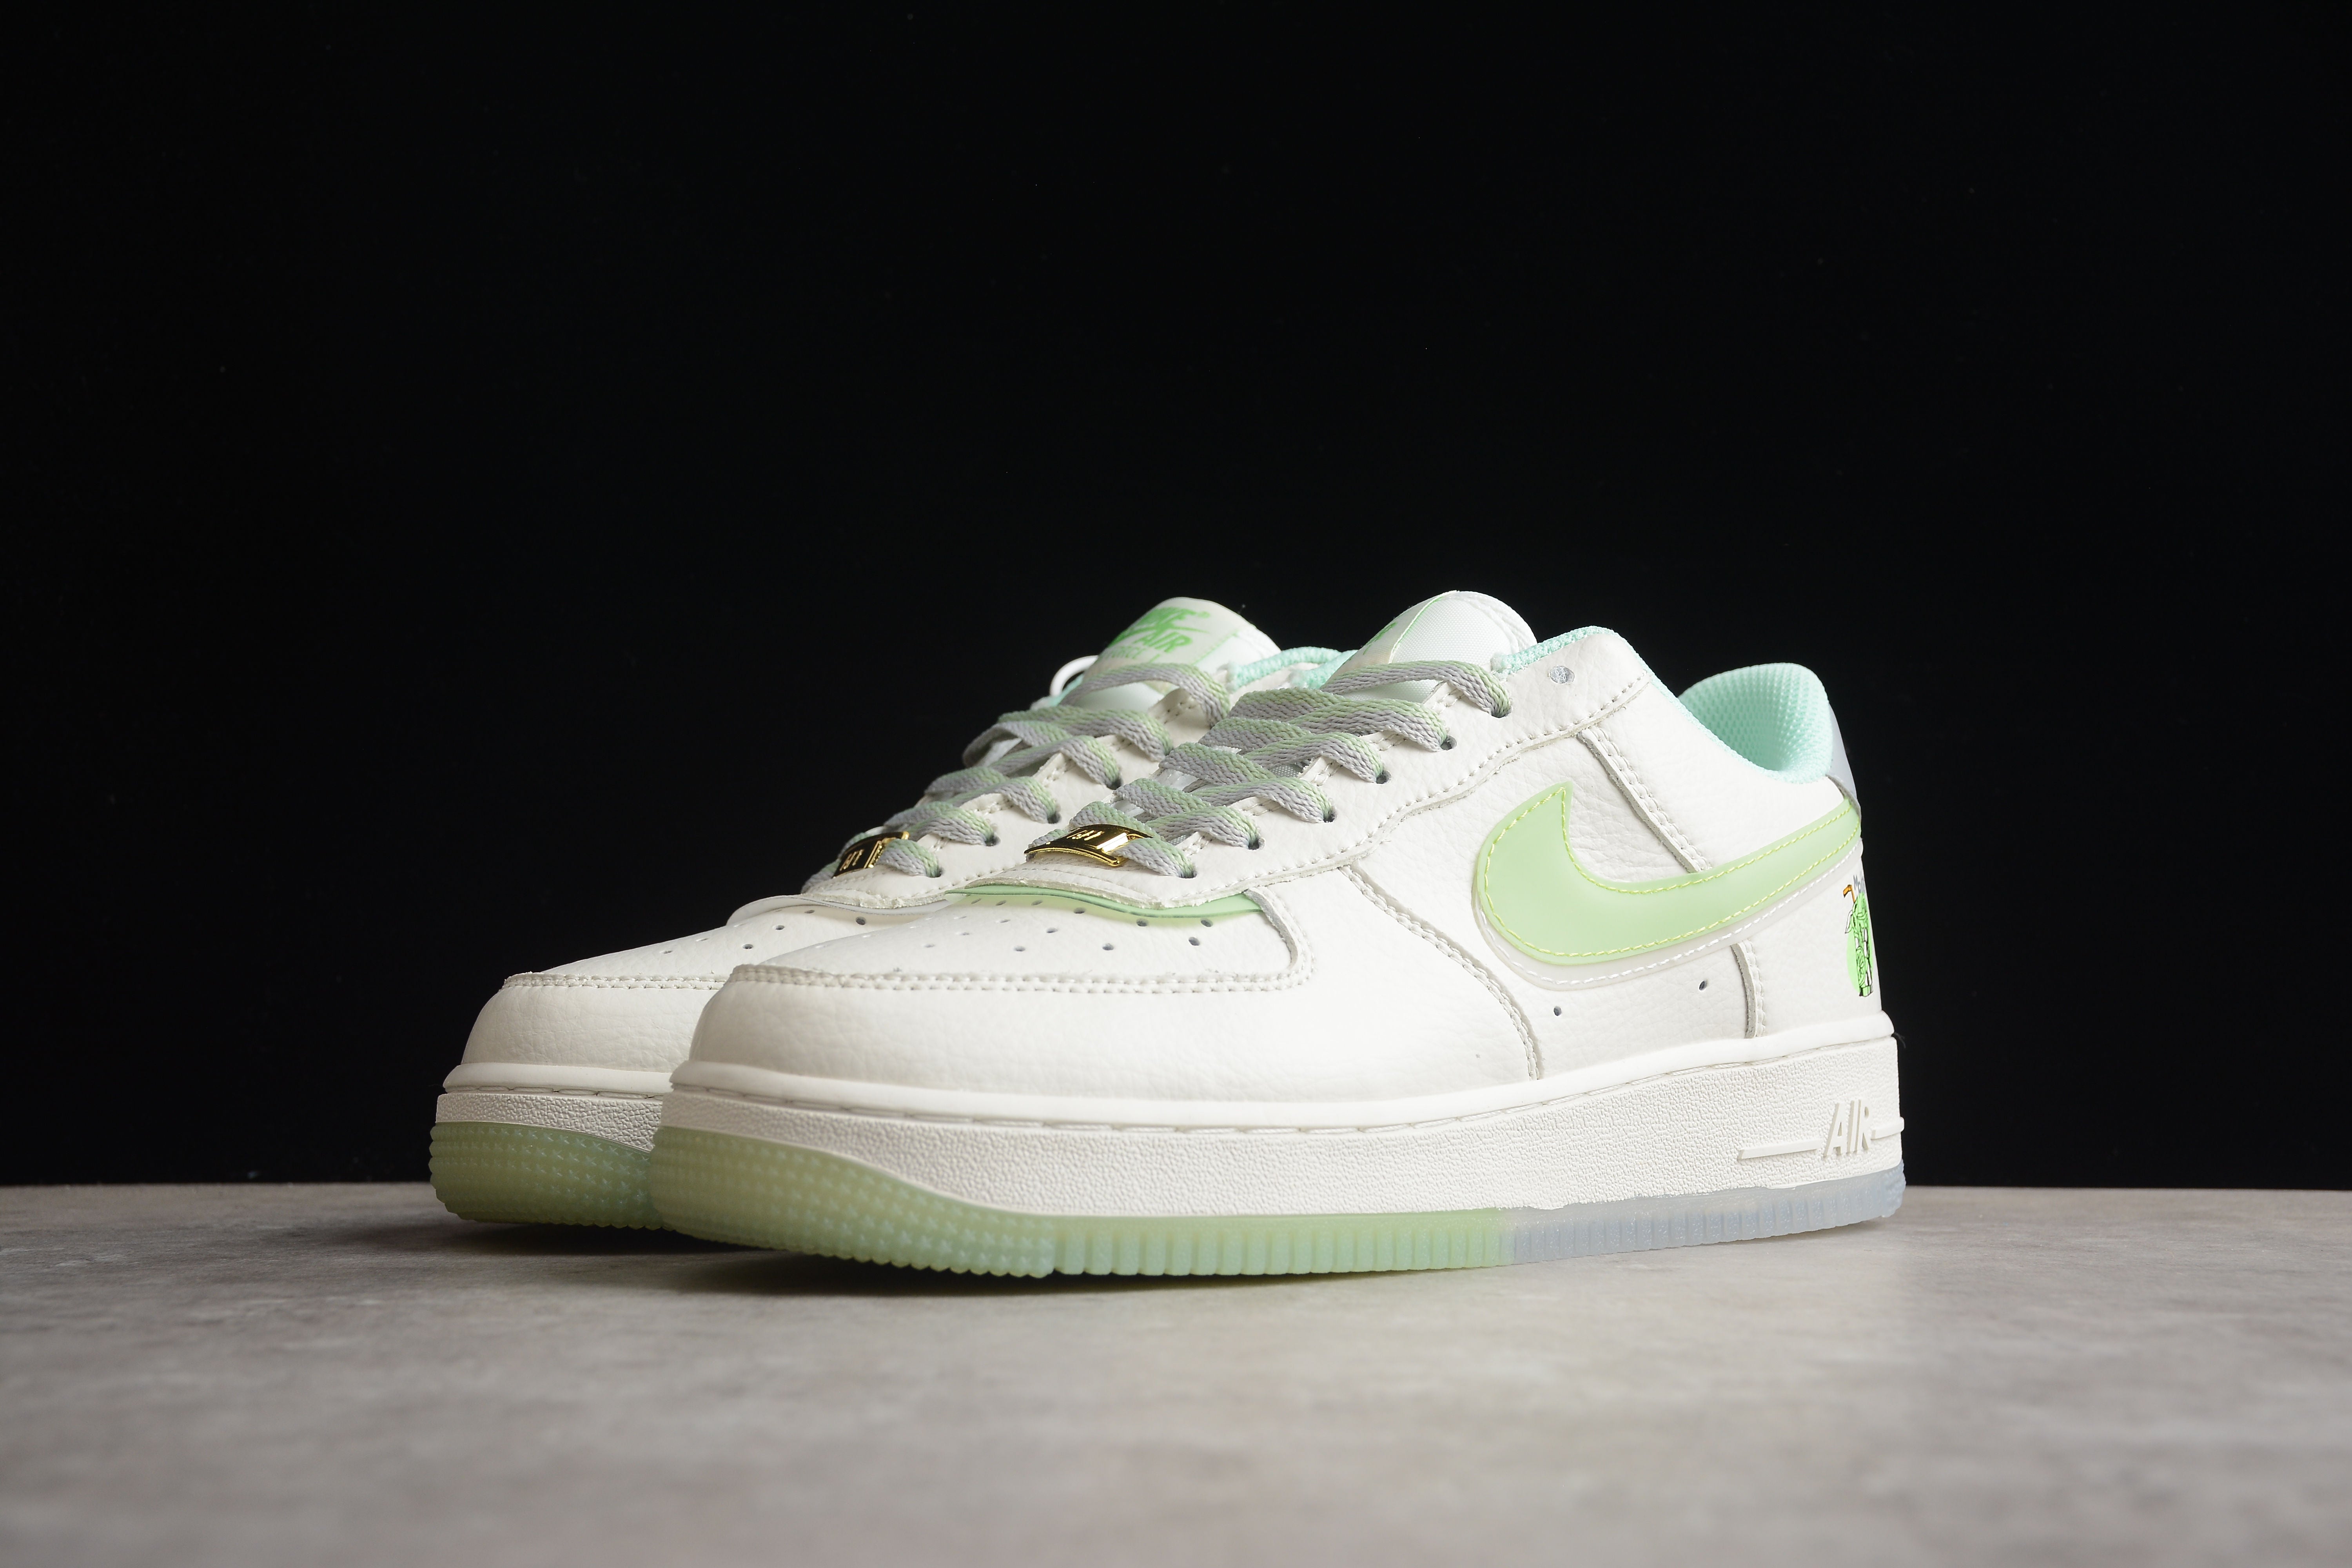 Nike airforce A1 green shoes